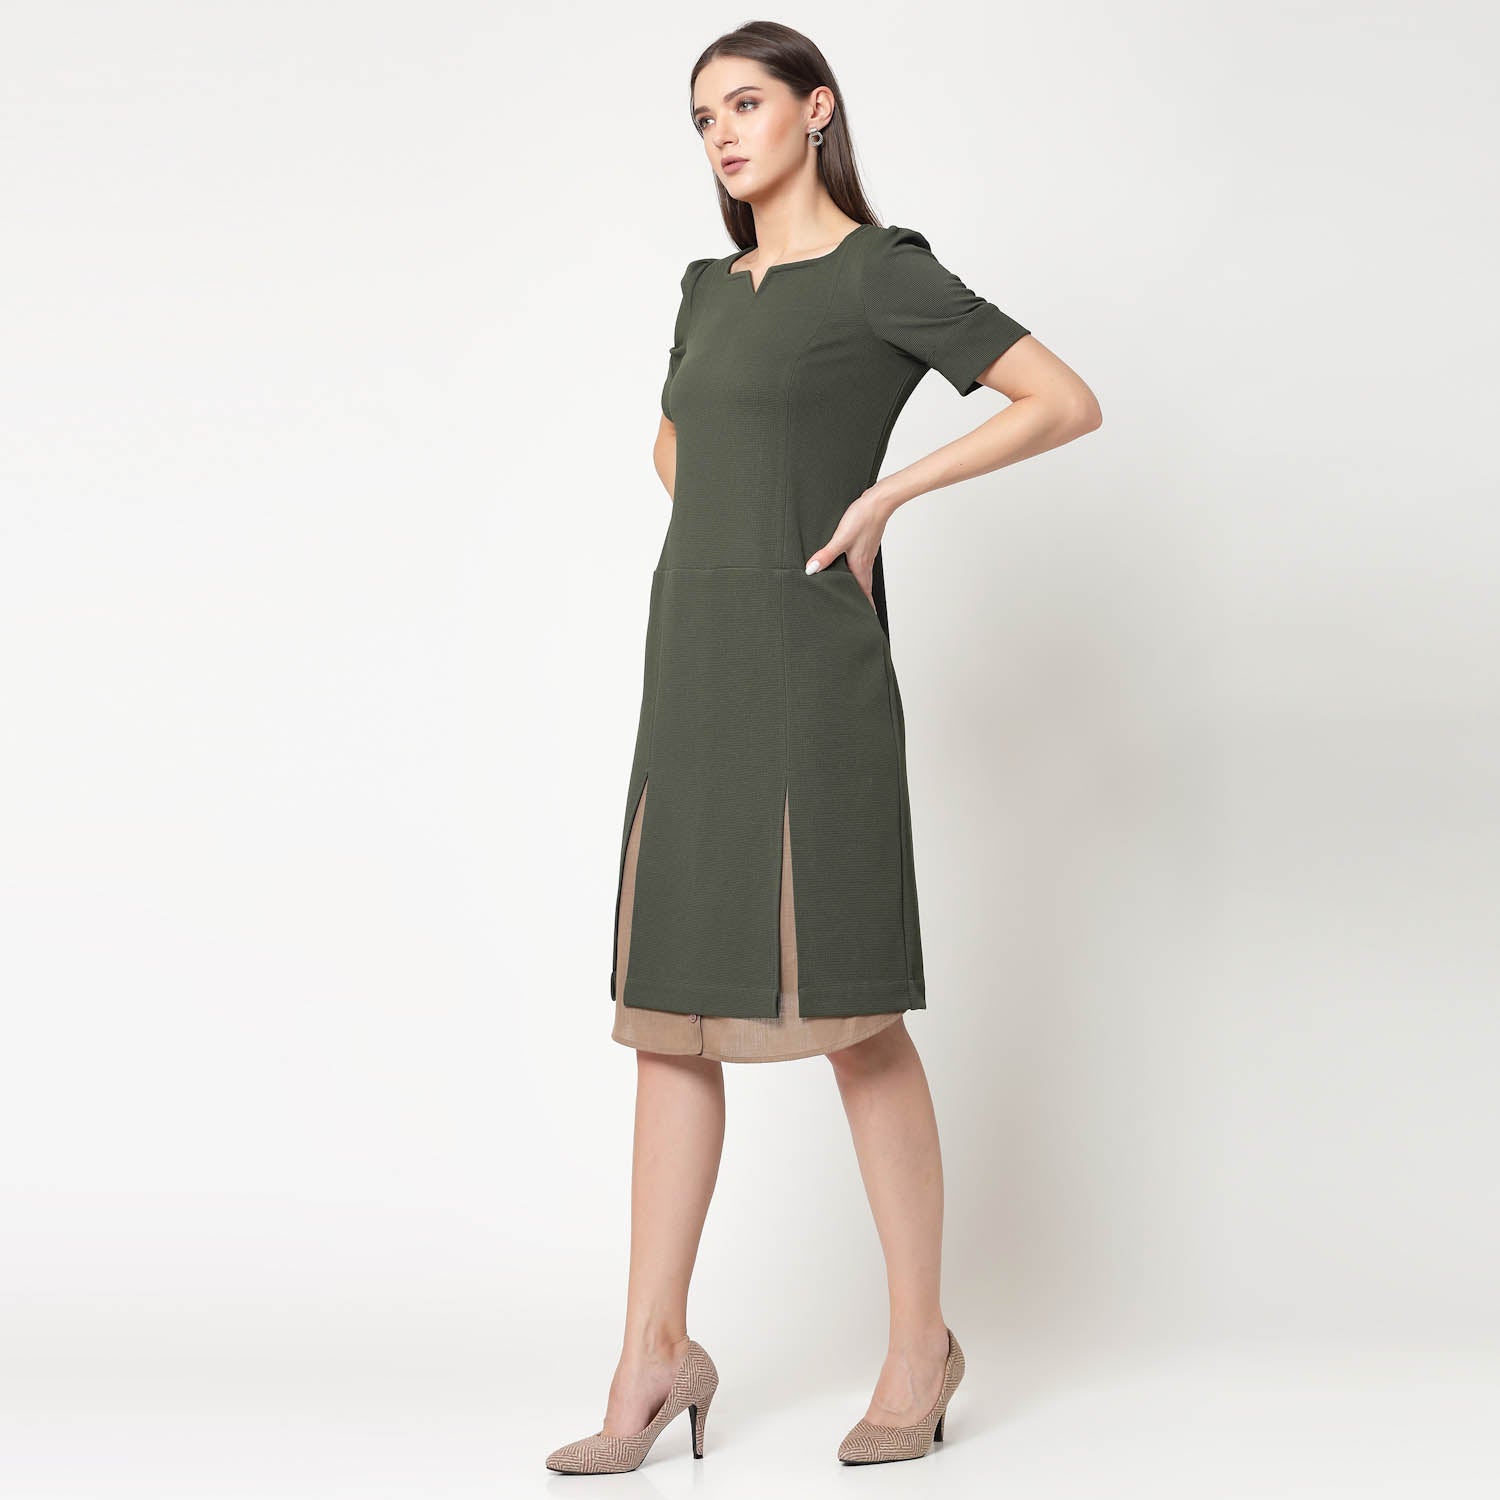 Olive Dress With Beige Inner Shirt